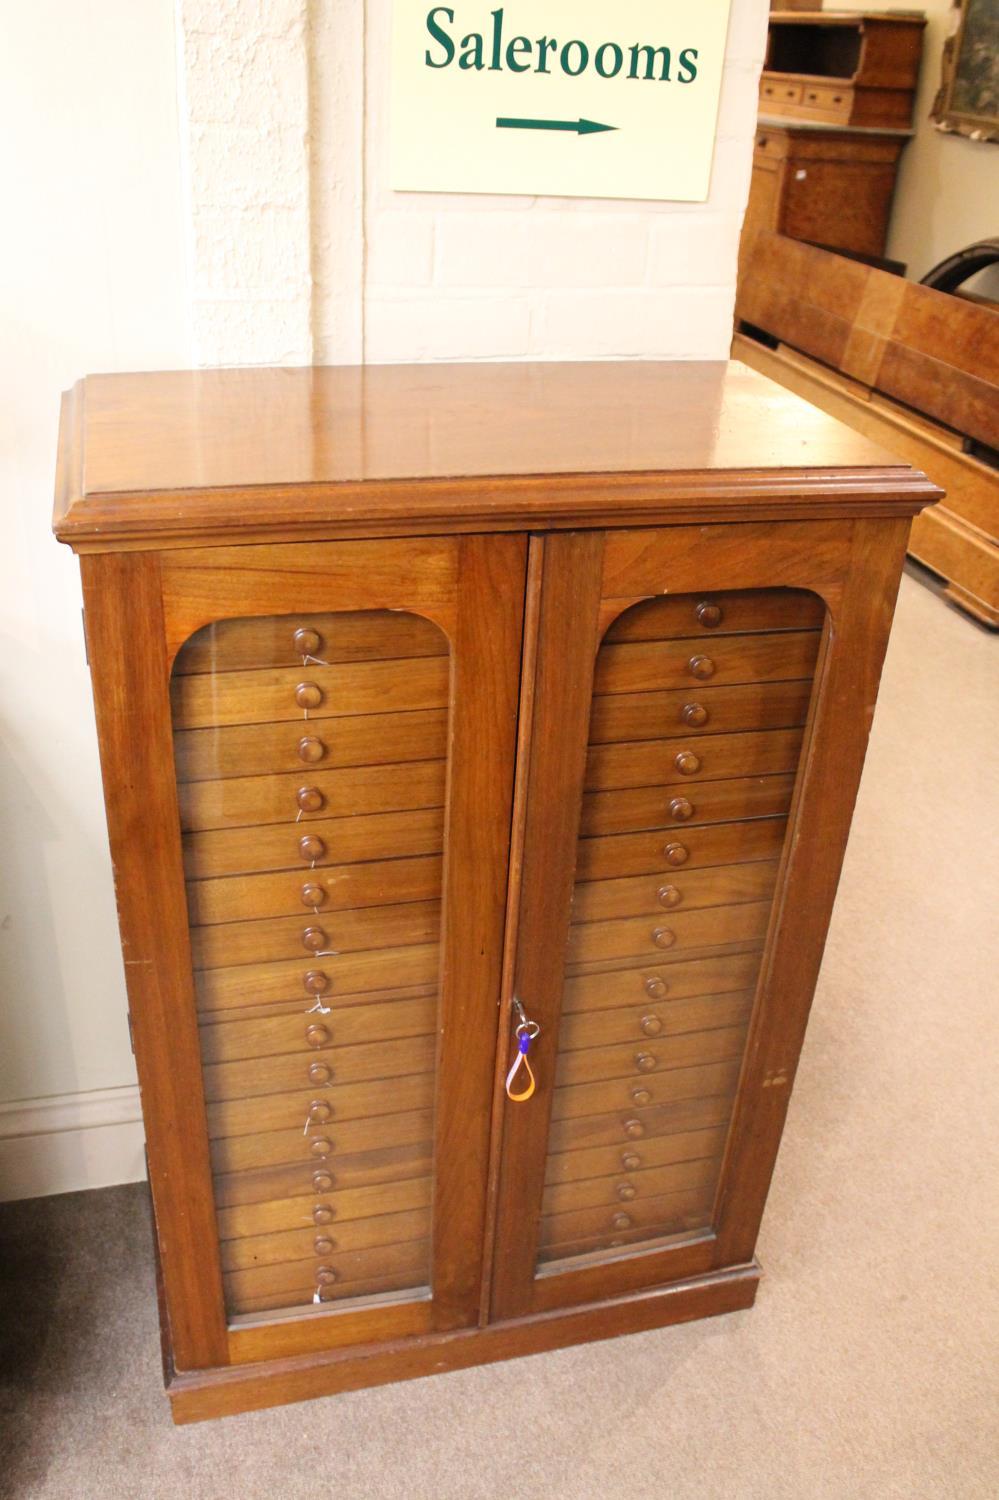 COLLECTORS CABINET BY WATKINS & DONCASTER - BUTTERFLIES & MOTHS a walnut collectors cabinet with - Image 2 of 23